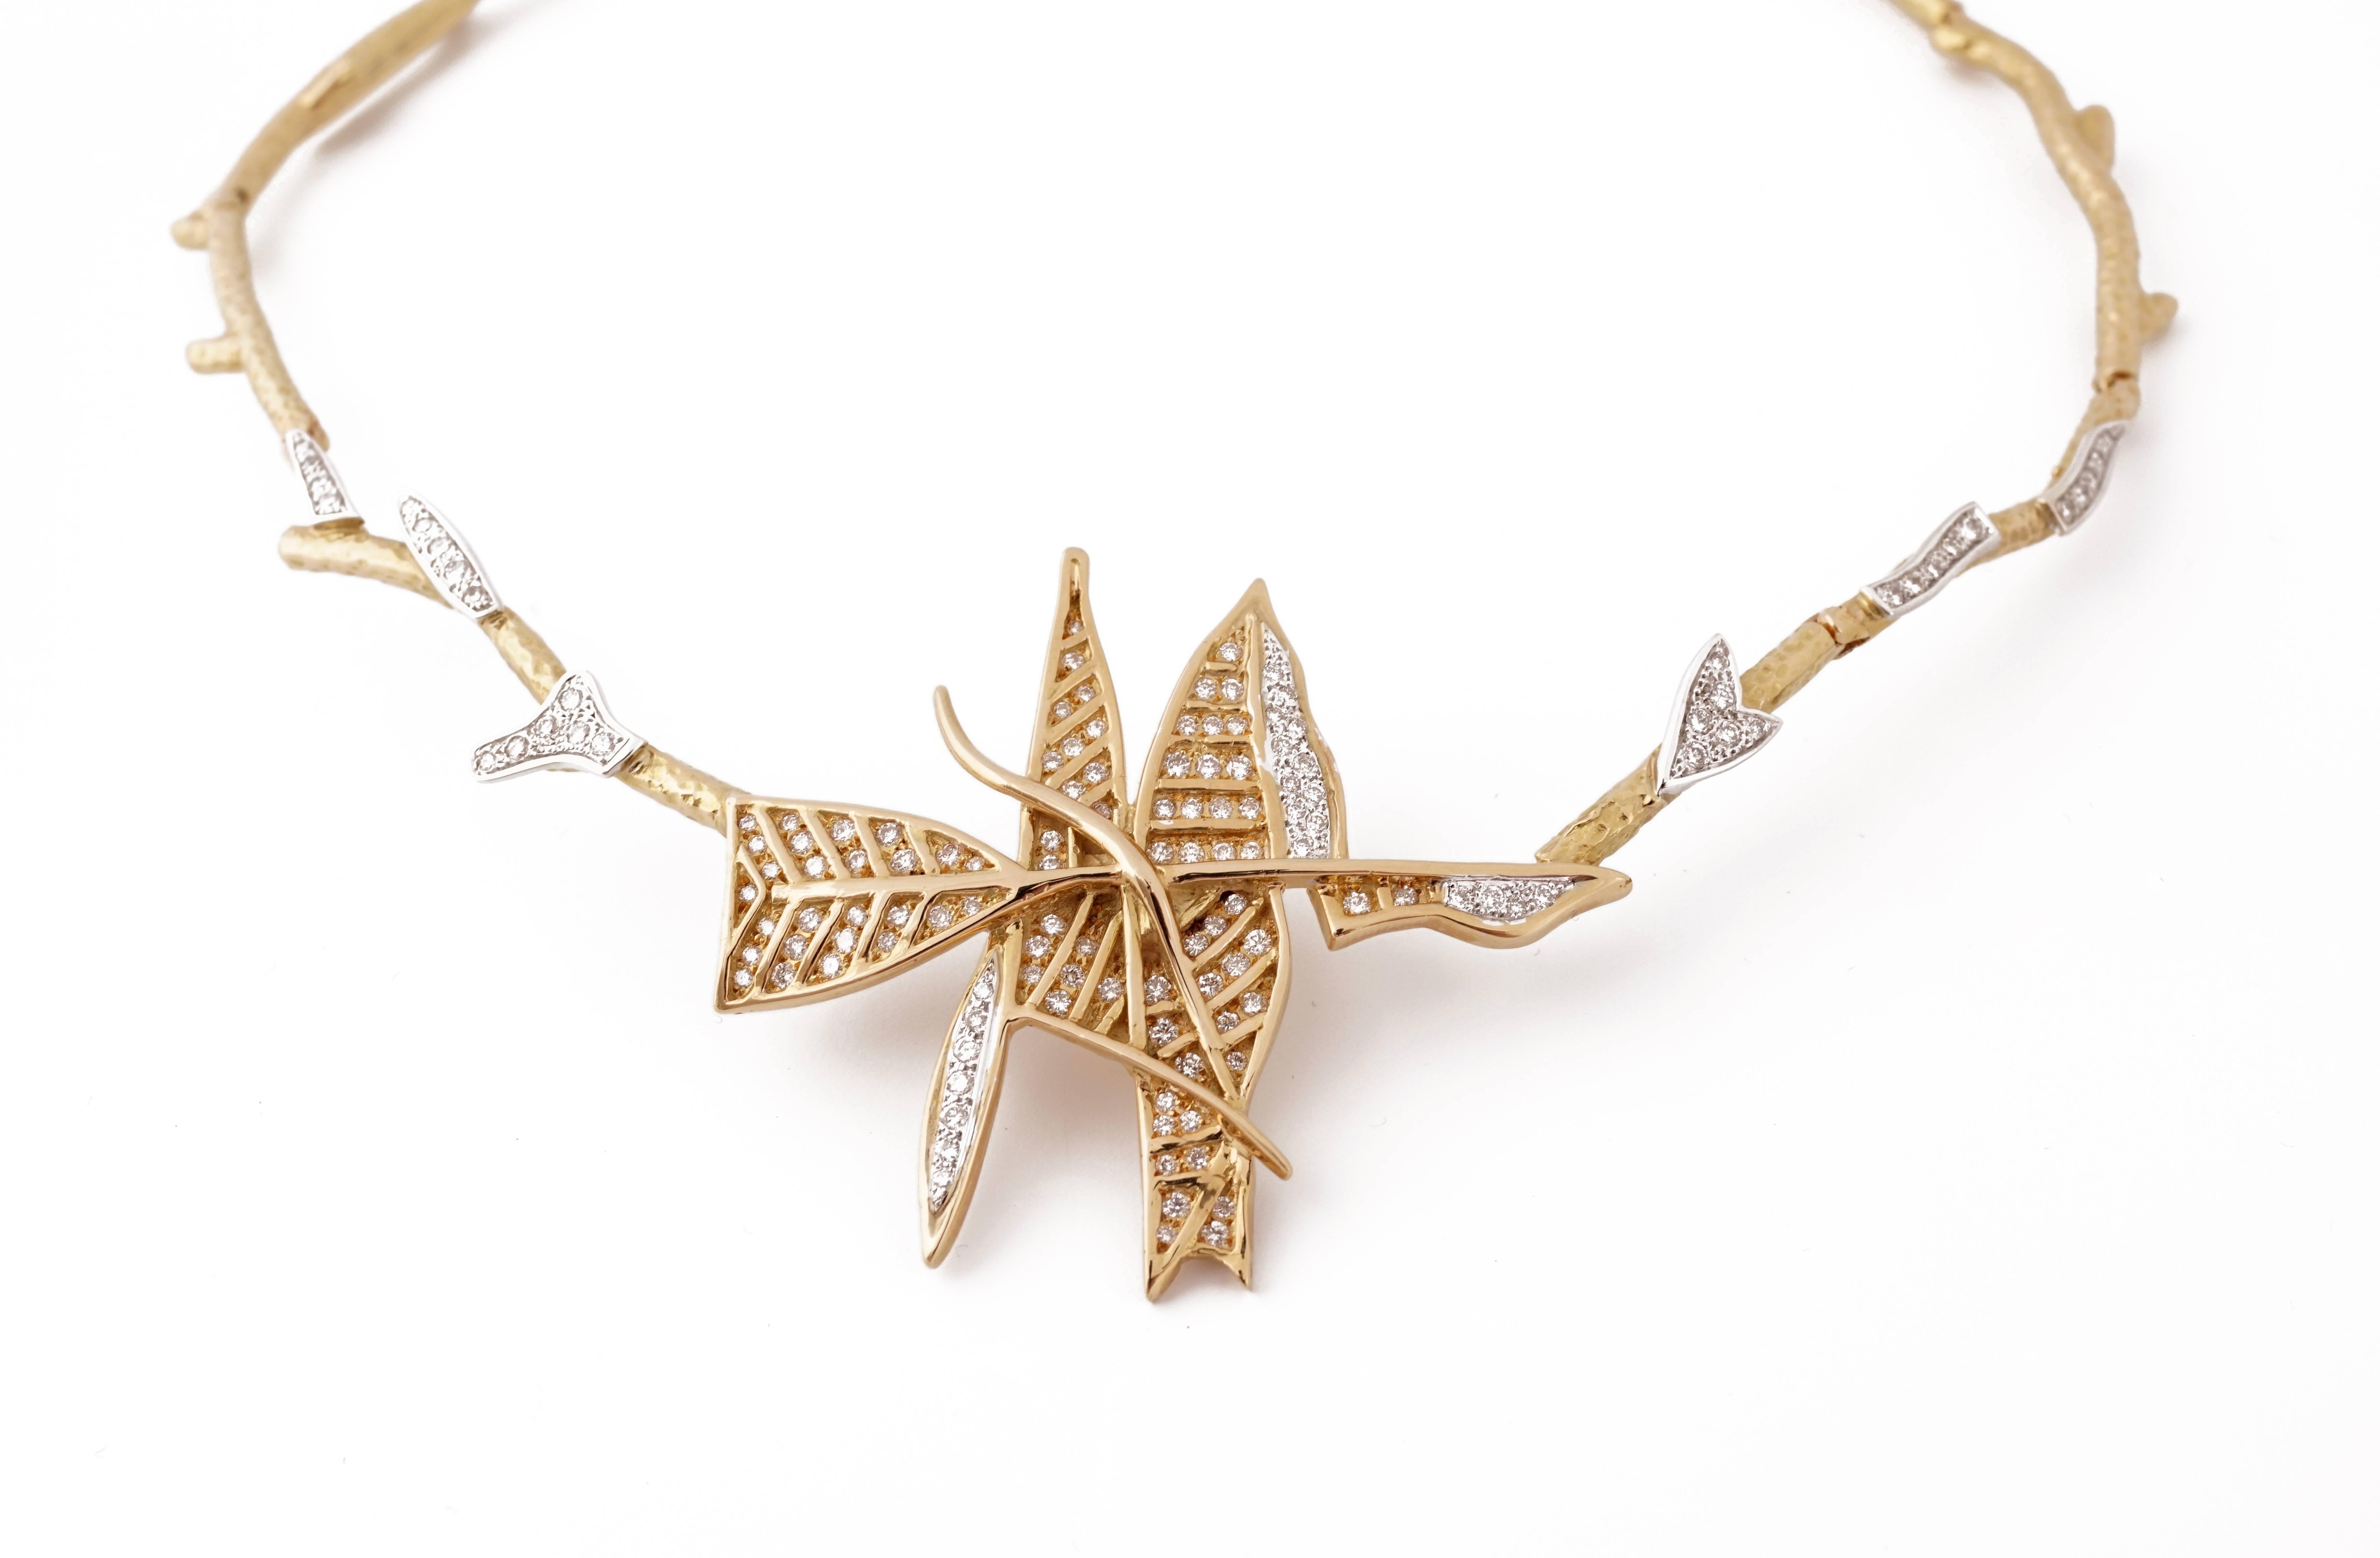 Exceptional 18K Gold and Diamonds Necklace by Georges Braque (1882-1963), inventor of cubism.
The piece is signed "Bijoux de Braque" and numbered 4/8. 
Neck size 42cm long (16.5inch)
The gouache of Alcyone from "Bijoux de Braque"